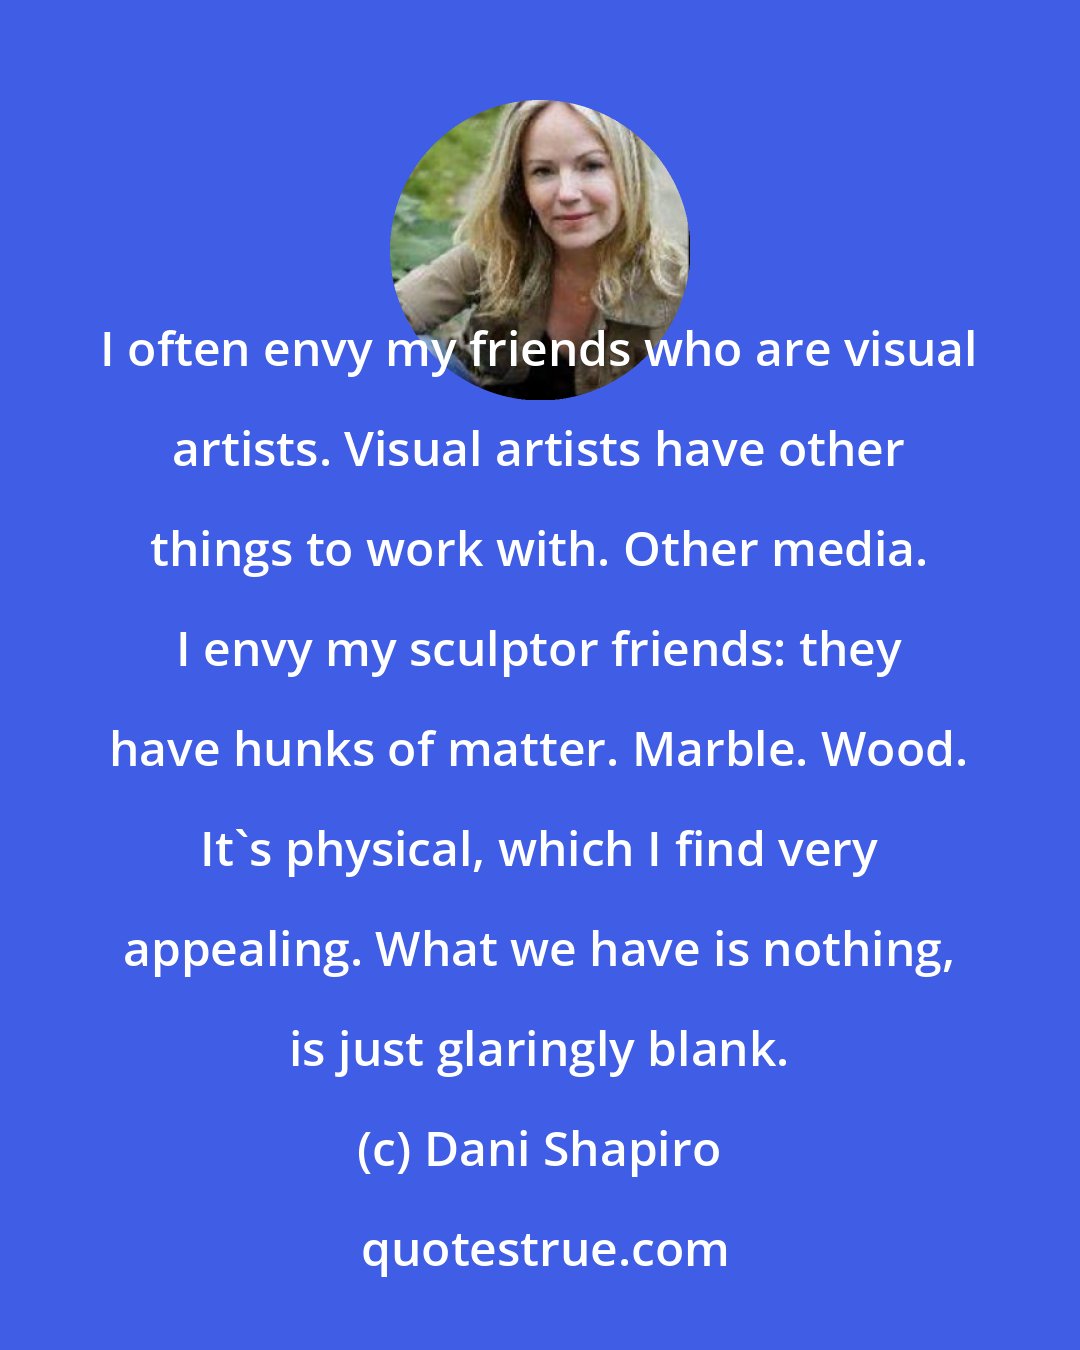 Dani Shapiro: I often envy my friends who are visual artists. Visual artists have other things to work with. Other media. I envy my sculptor friends: they have hunks of matter. Marble. Wood. It's physical, which I find very appealing. What we have is nothing, is just glaringly blank.